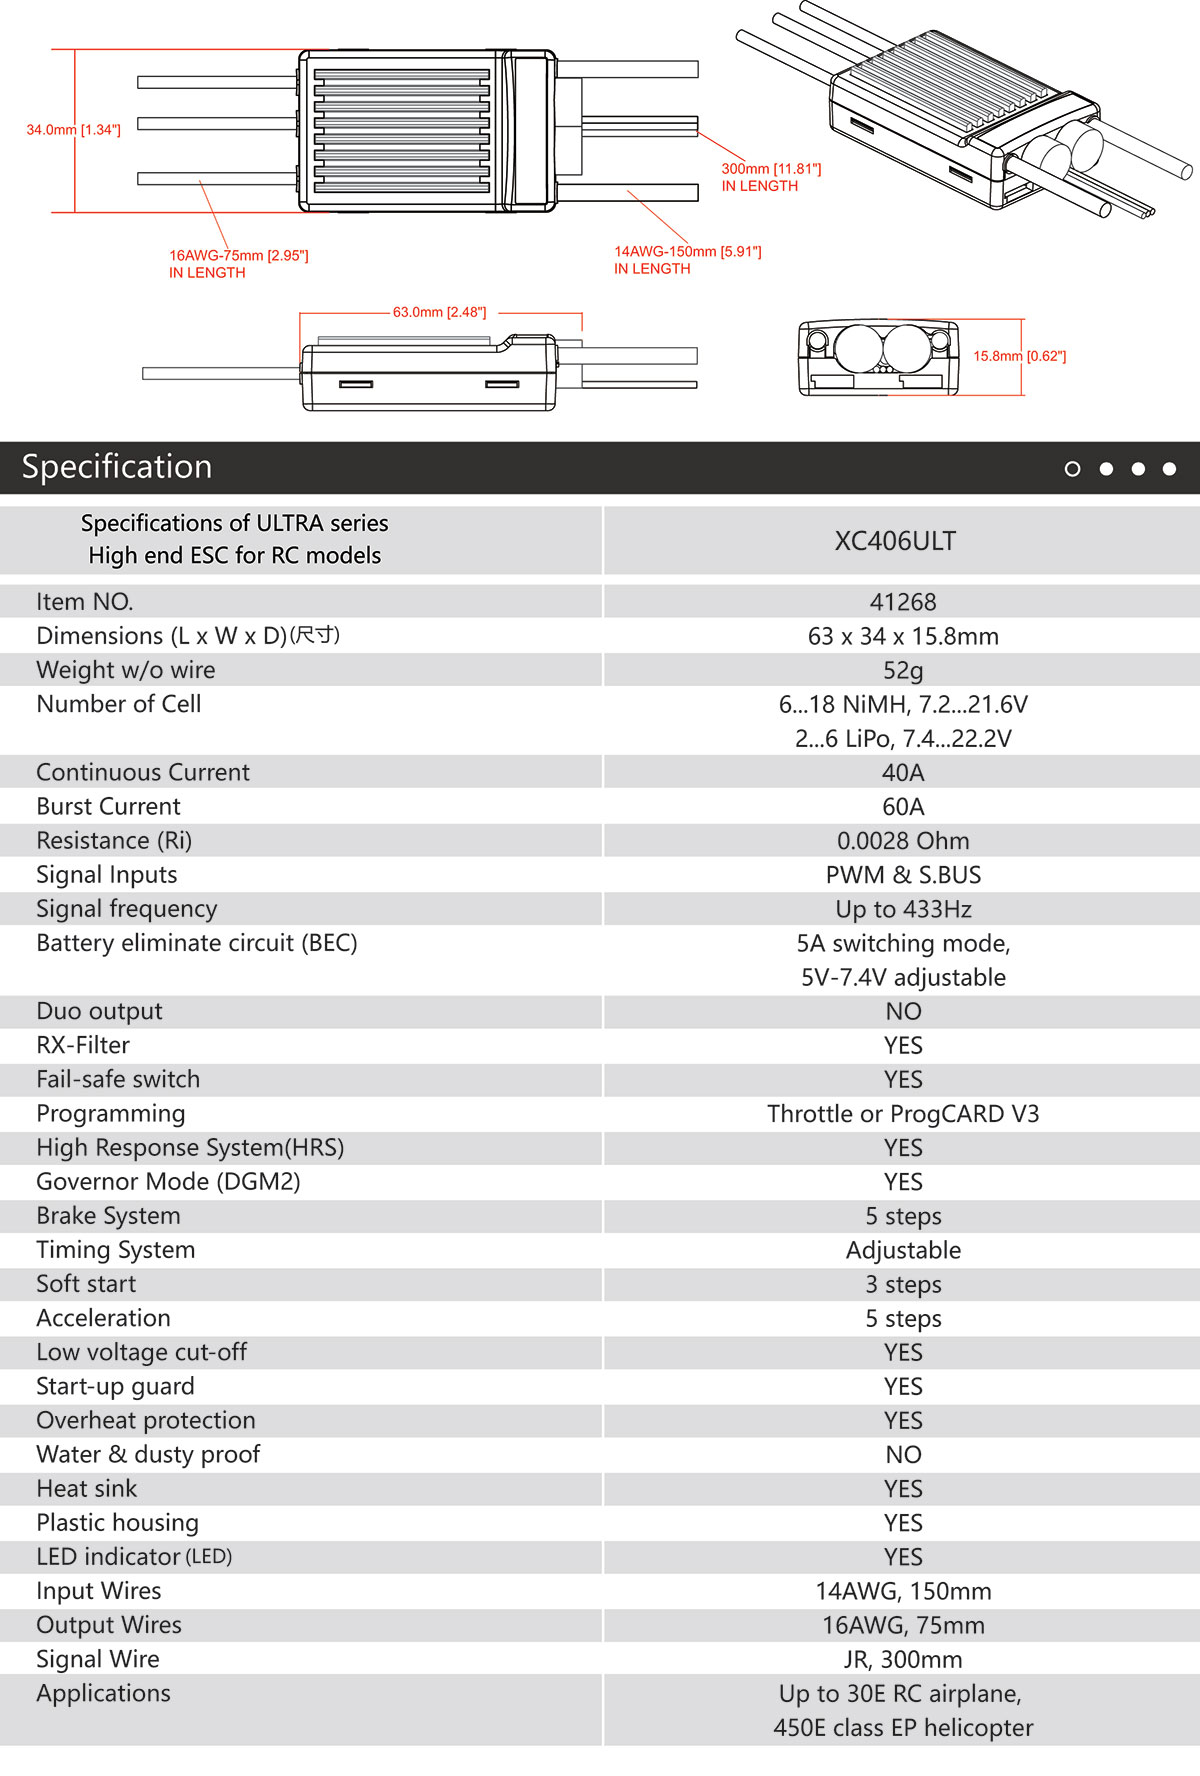 XC406ULT Specifications